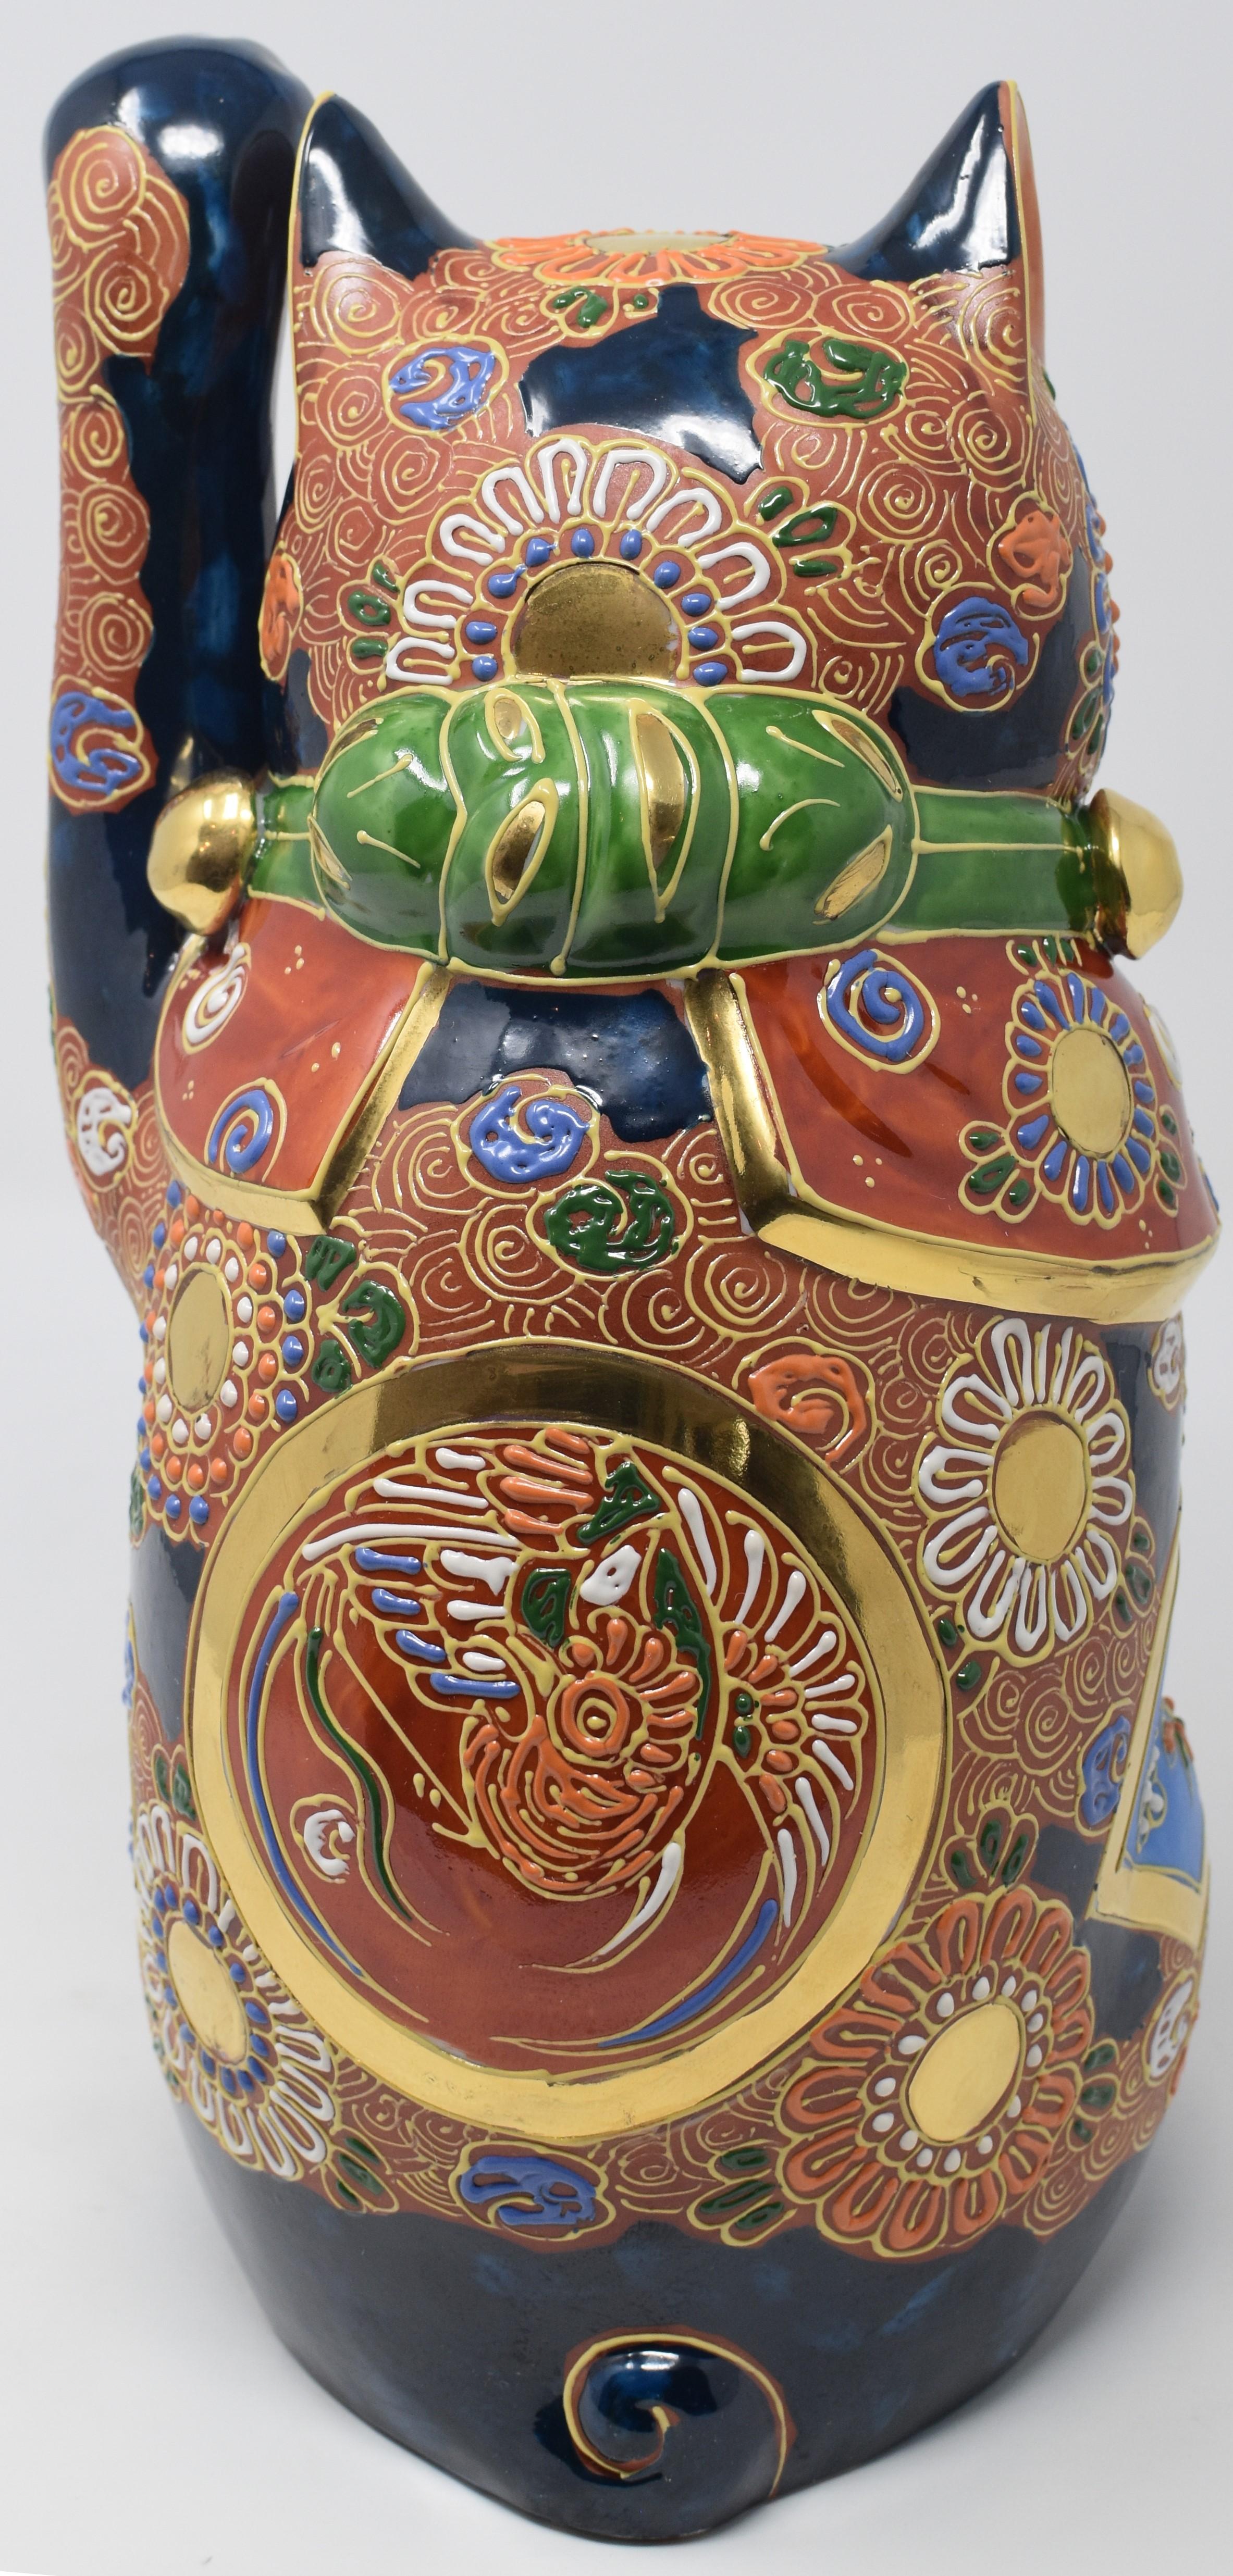 Japanese Contemporary beckoning cat, a uniquely gilded and hand painted porcelain piece from the Kutani region of Japan. The cat raising his left paw is adorned with multiple golden medallions and is covered with raised loops characteristic of the